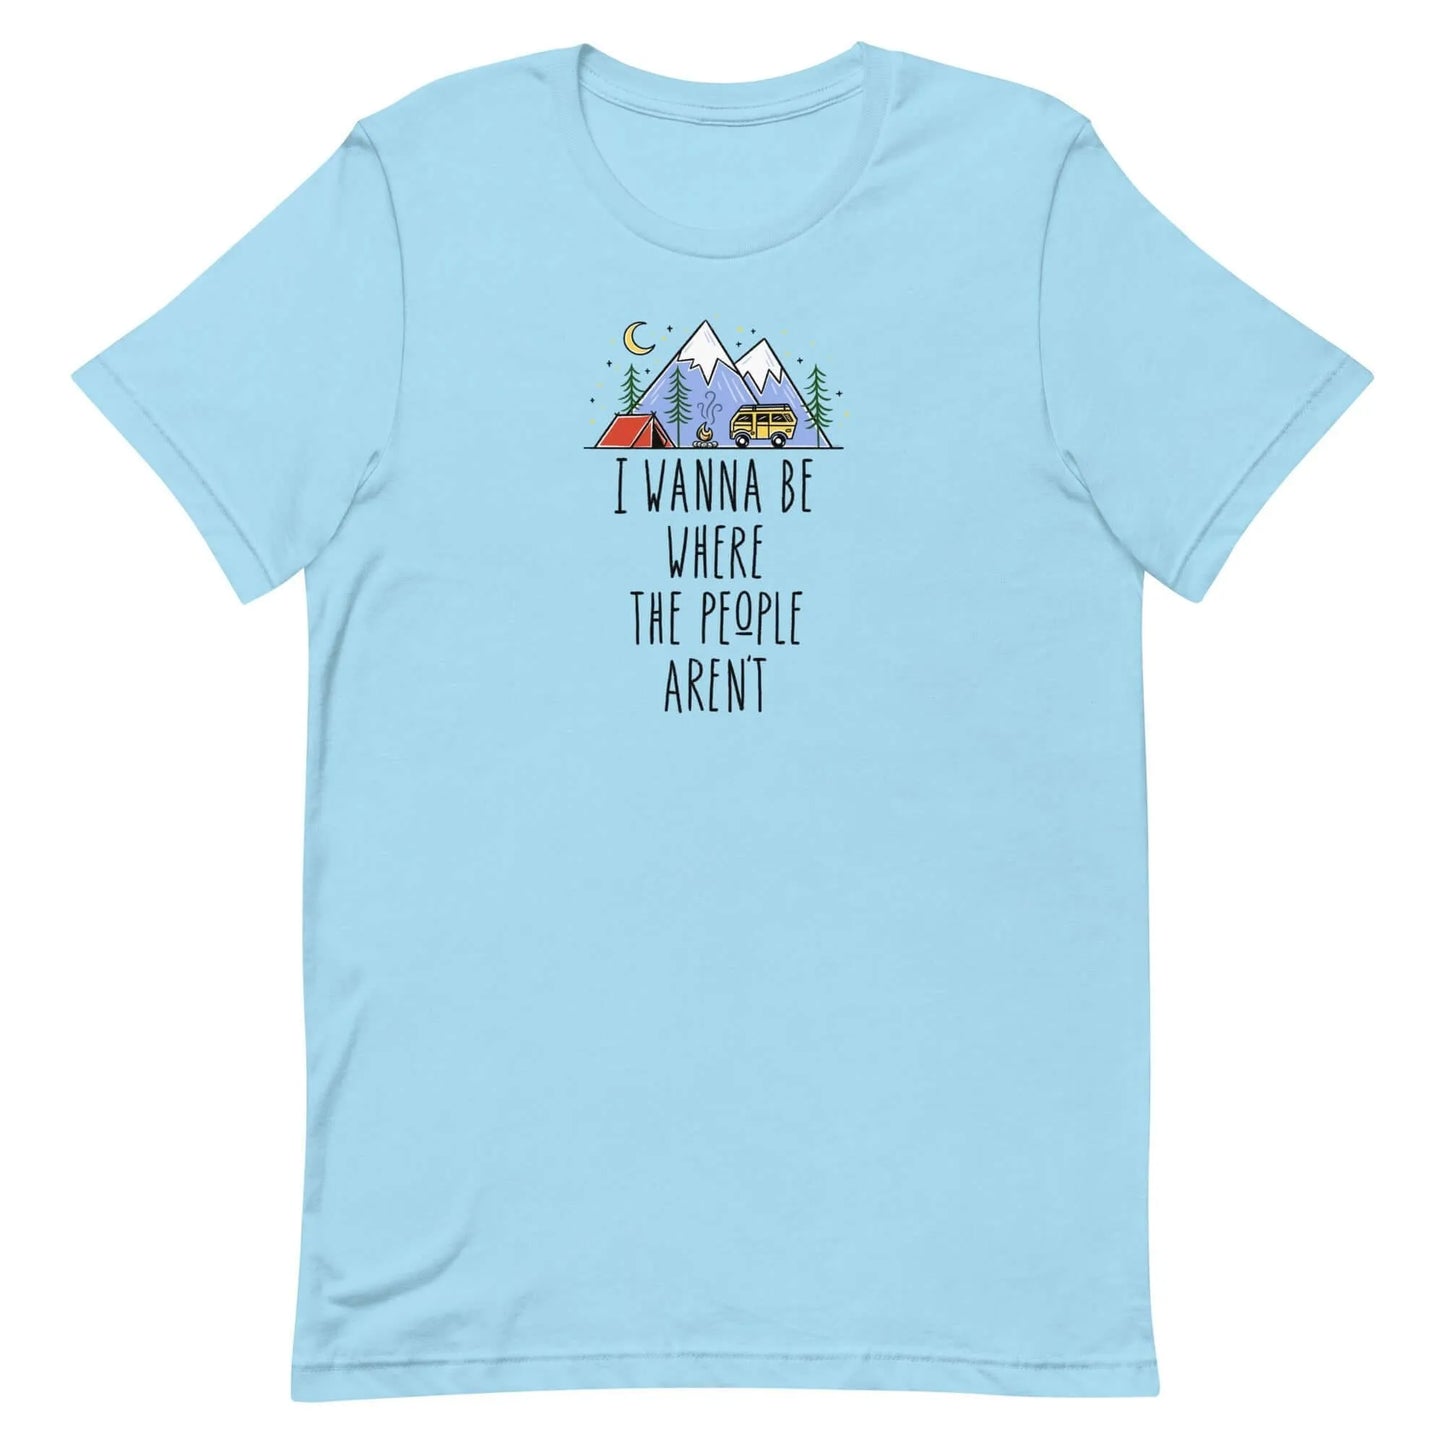 Where The People Aren’t Unisex T-Shirt